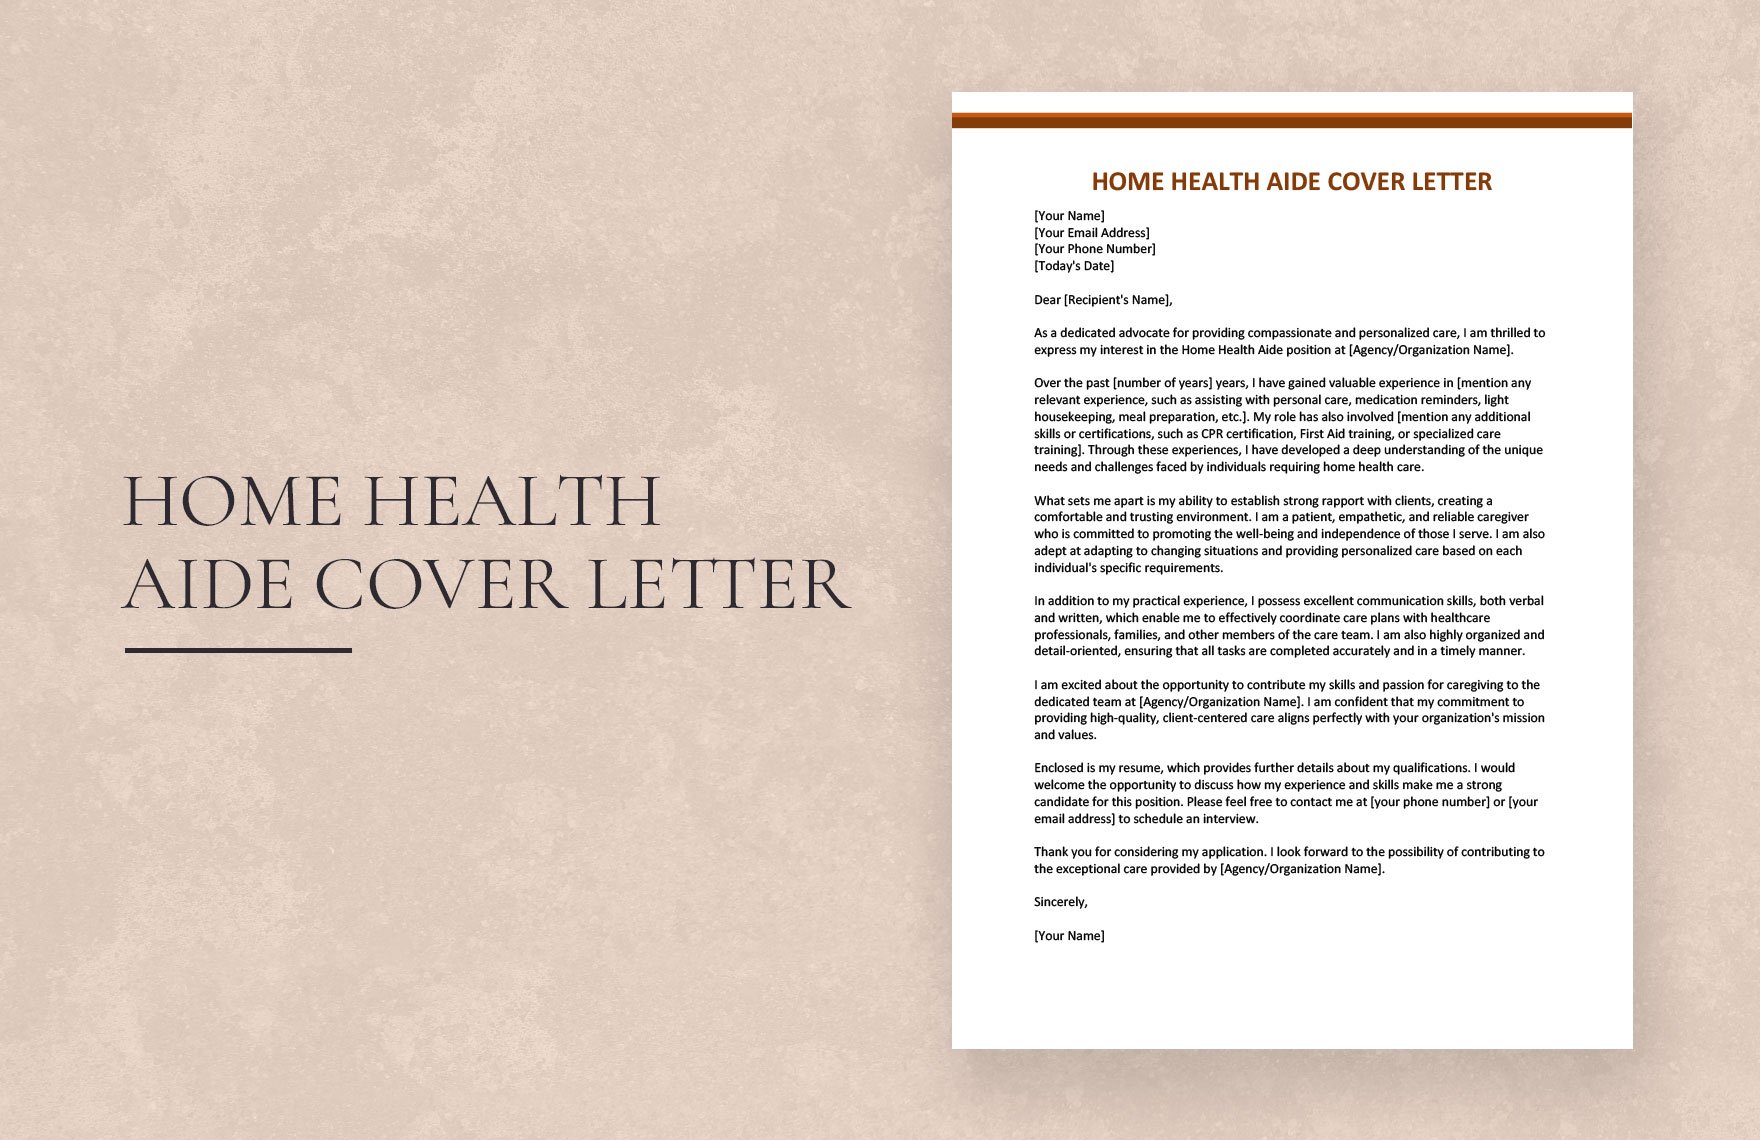 Home Health Aide Cover Letter